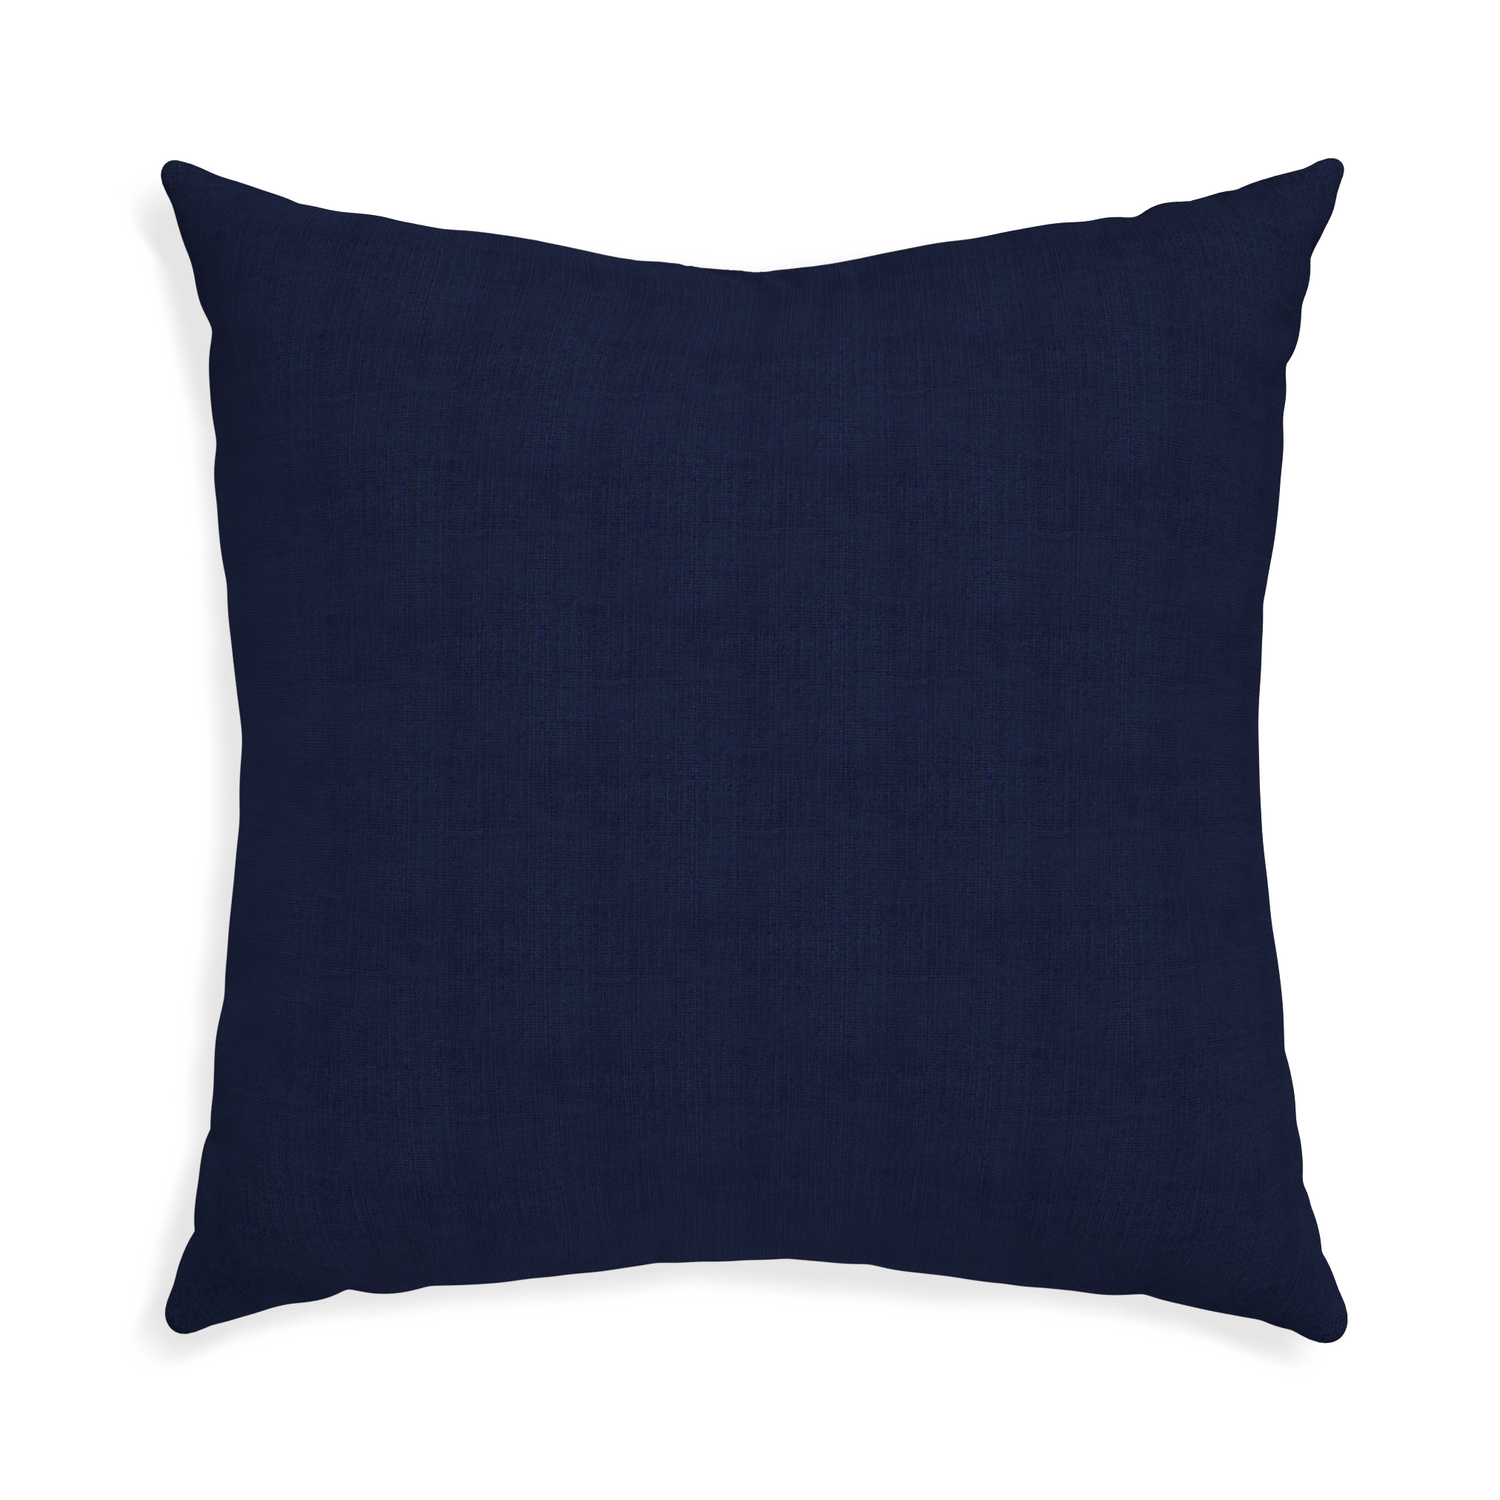 Euro-sham midnight custom pillow with none on white background